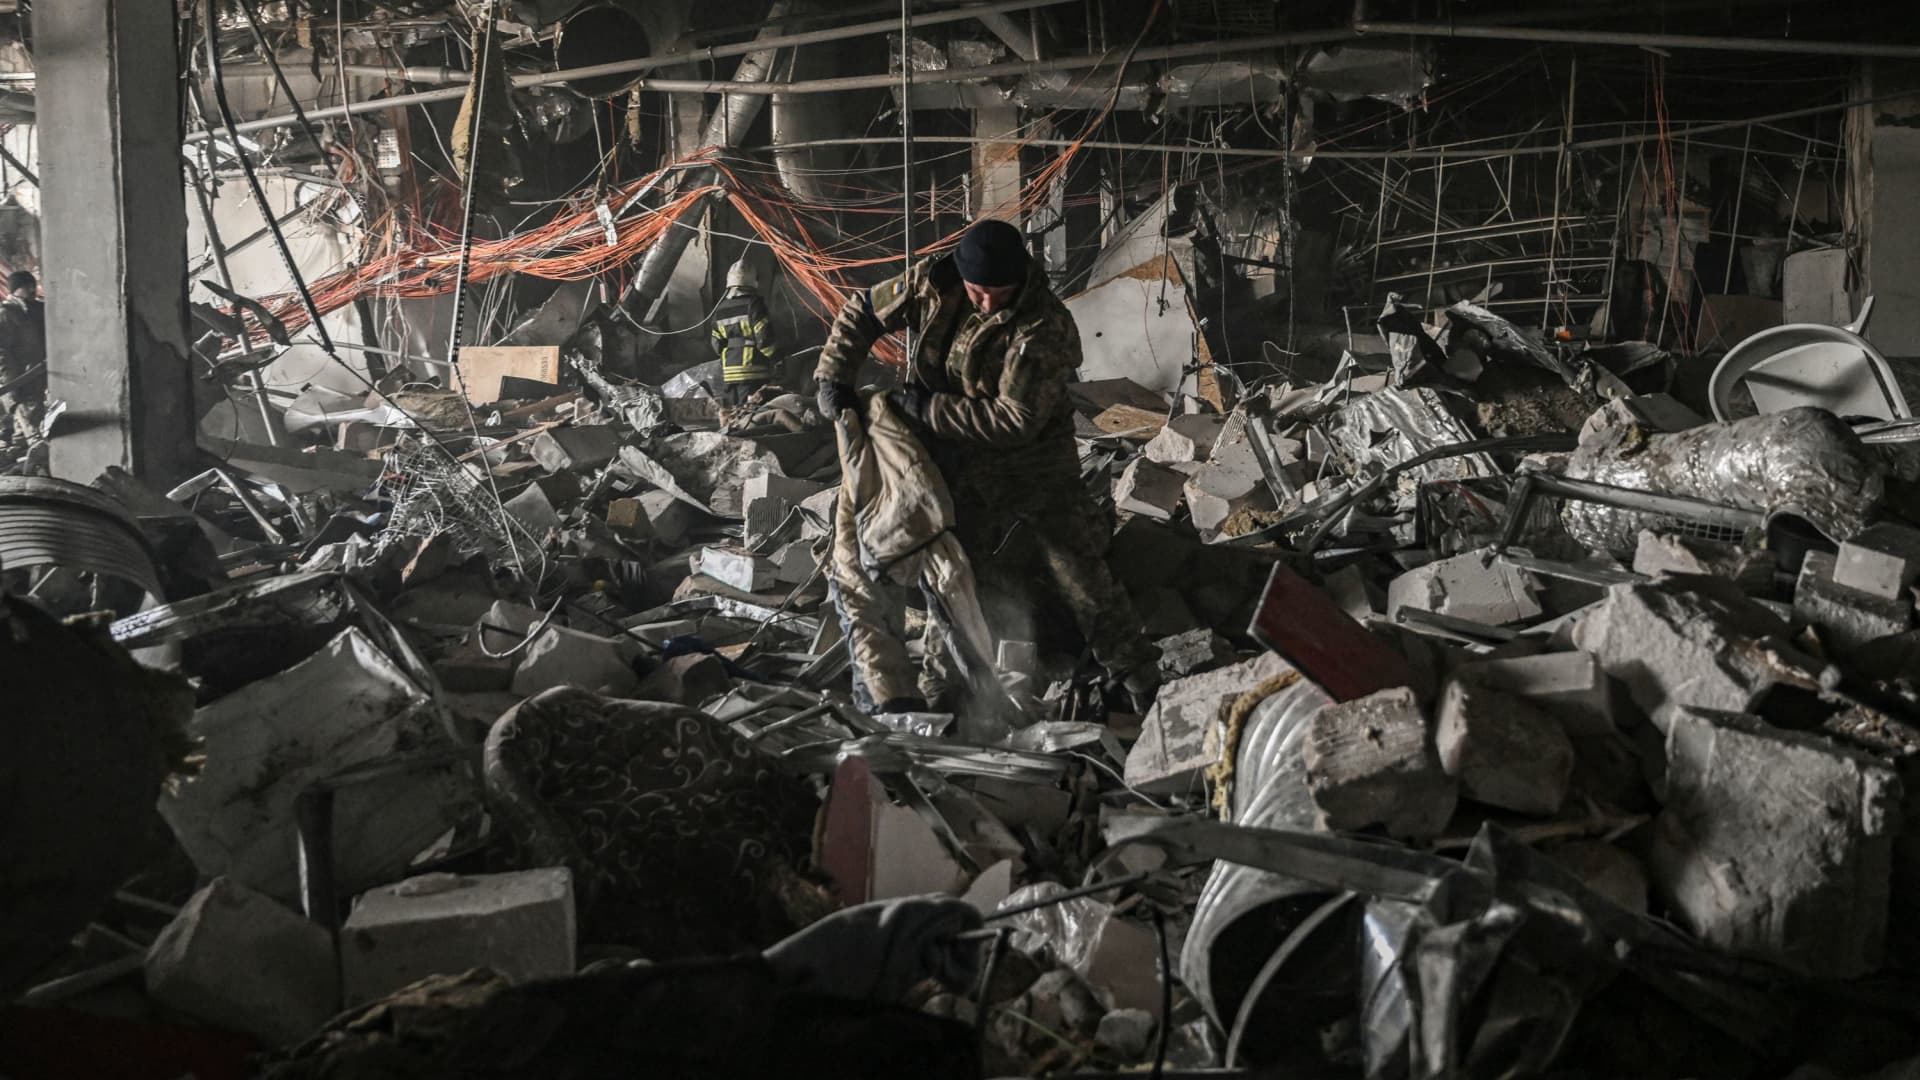 Ukranian servicemen search through rubble inside the Retroville shopping mall after a Russian attack in northwest of Kyiv on March 21, 2022.